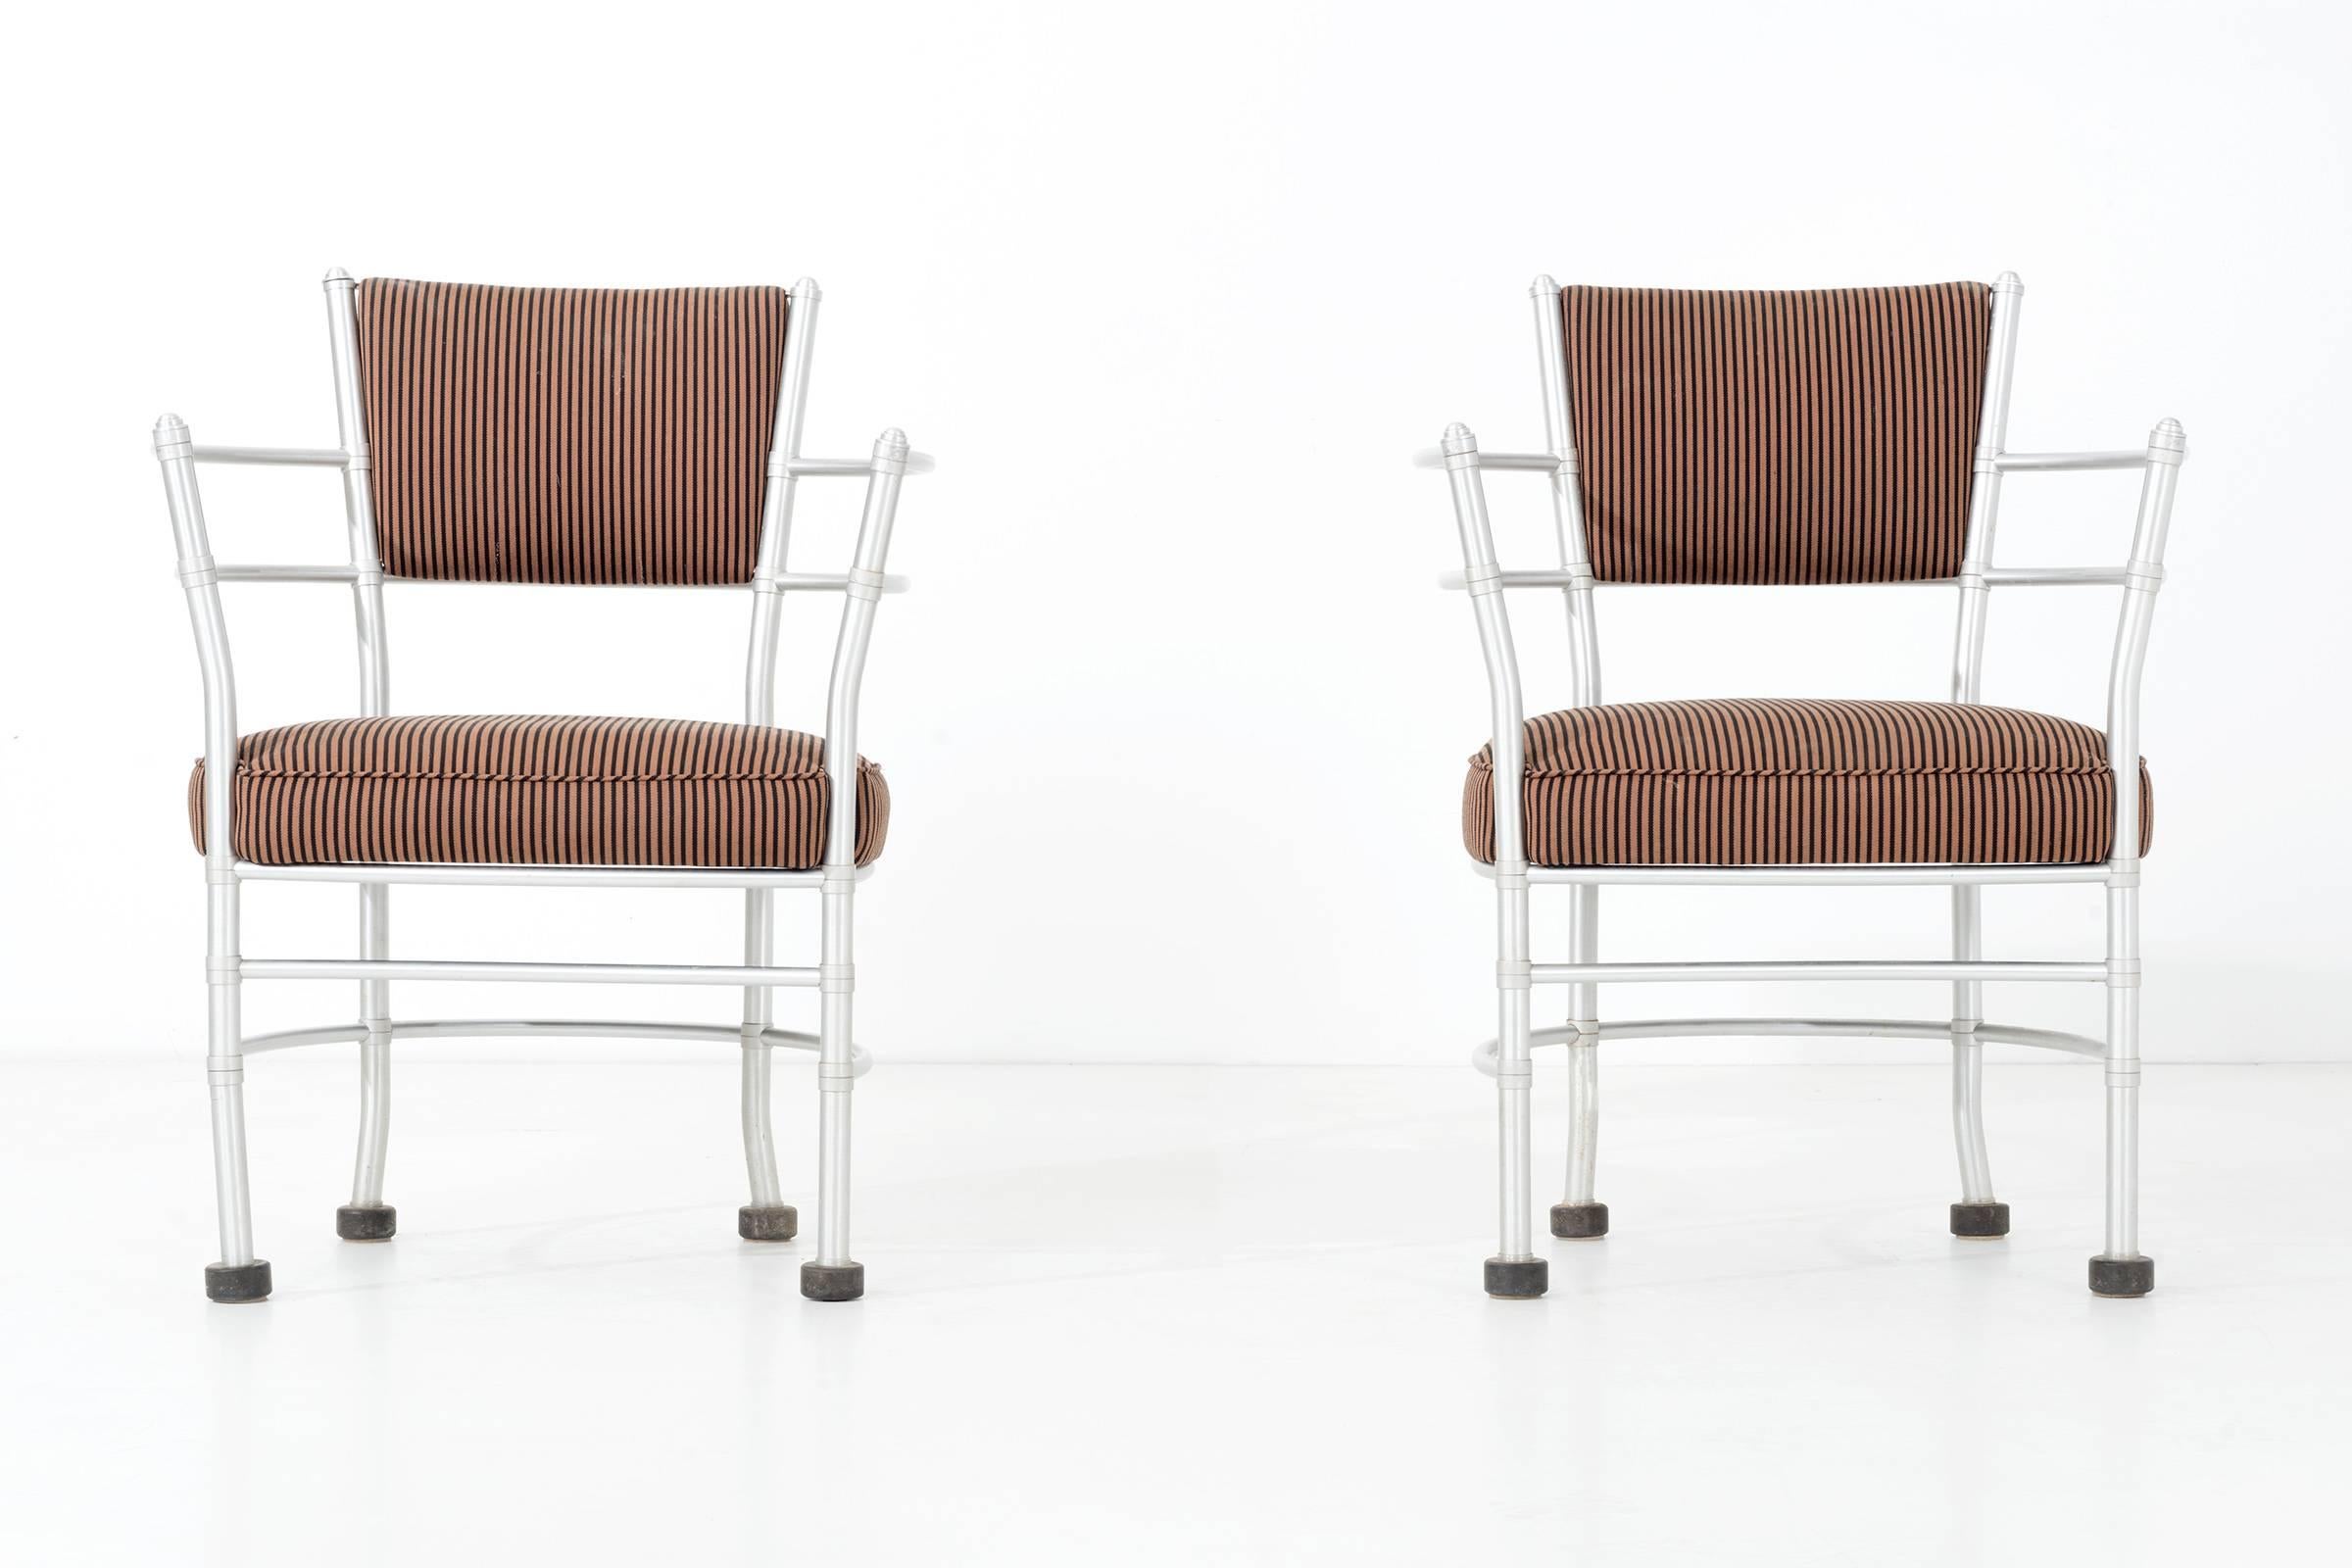 Upholstered aluminum curved back Pull-up chairs with rubber capped feet.